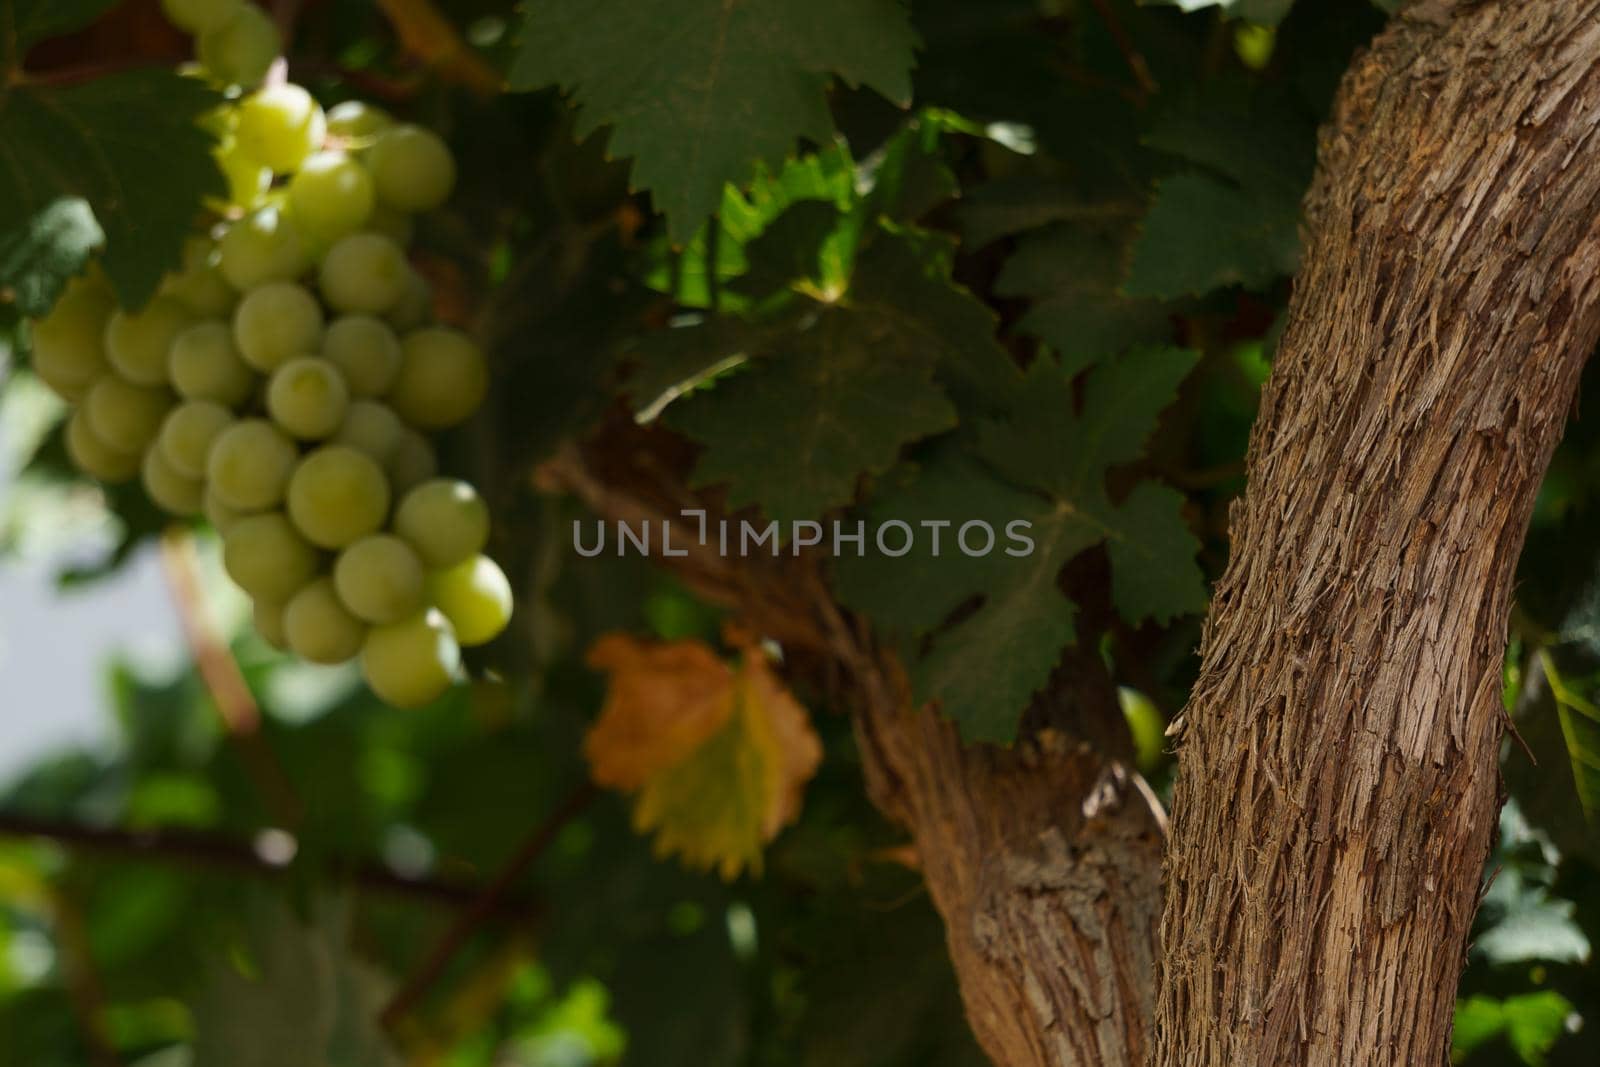 bunch of green grapes on the vine illuminated by the sun's rays by joseantona